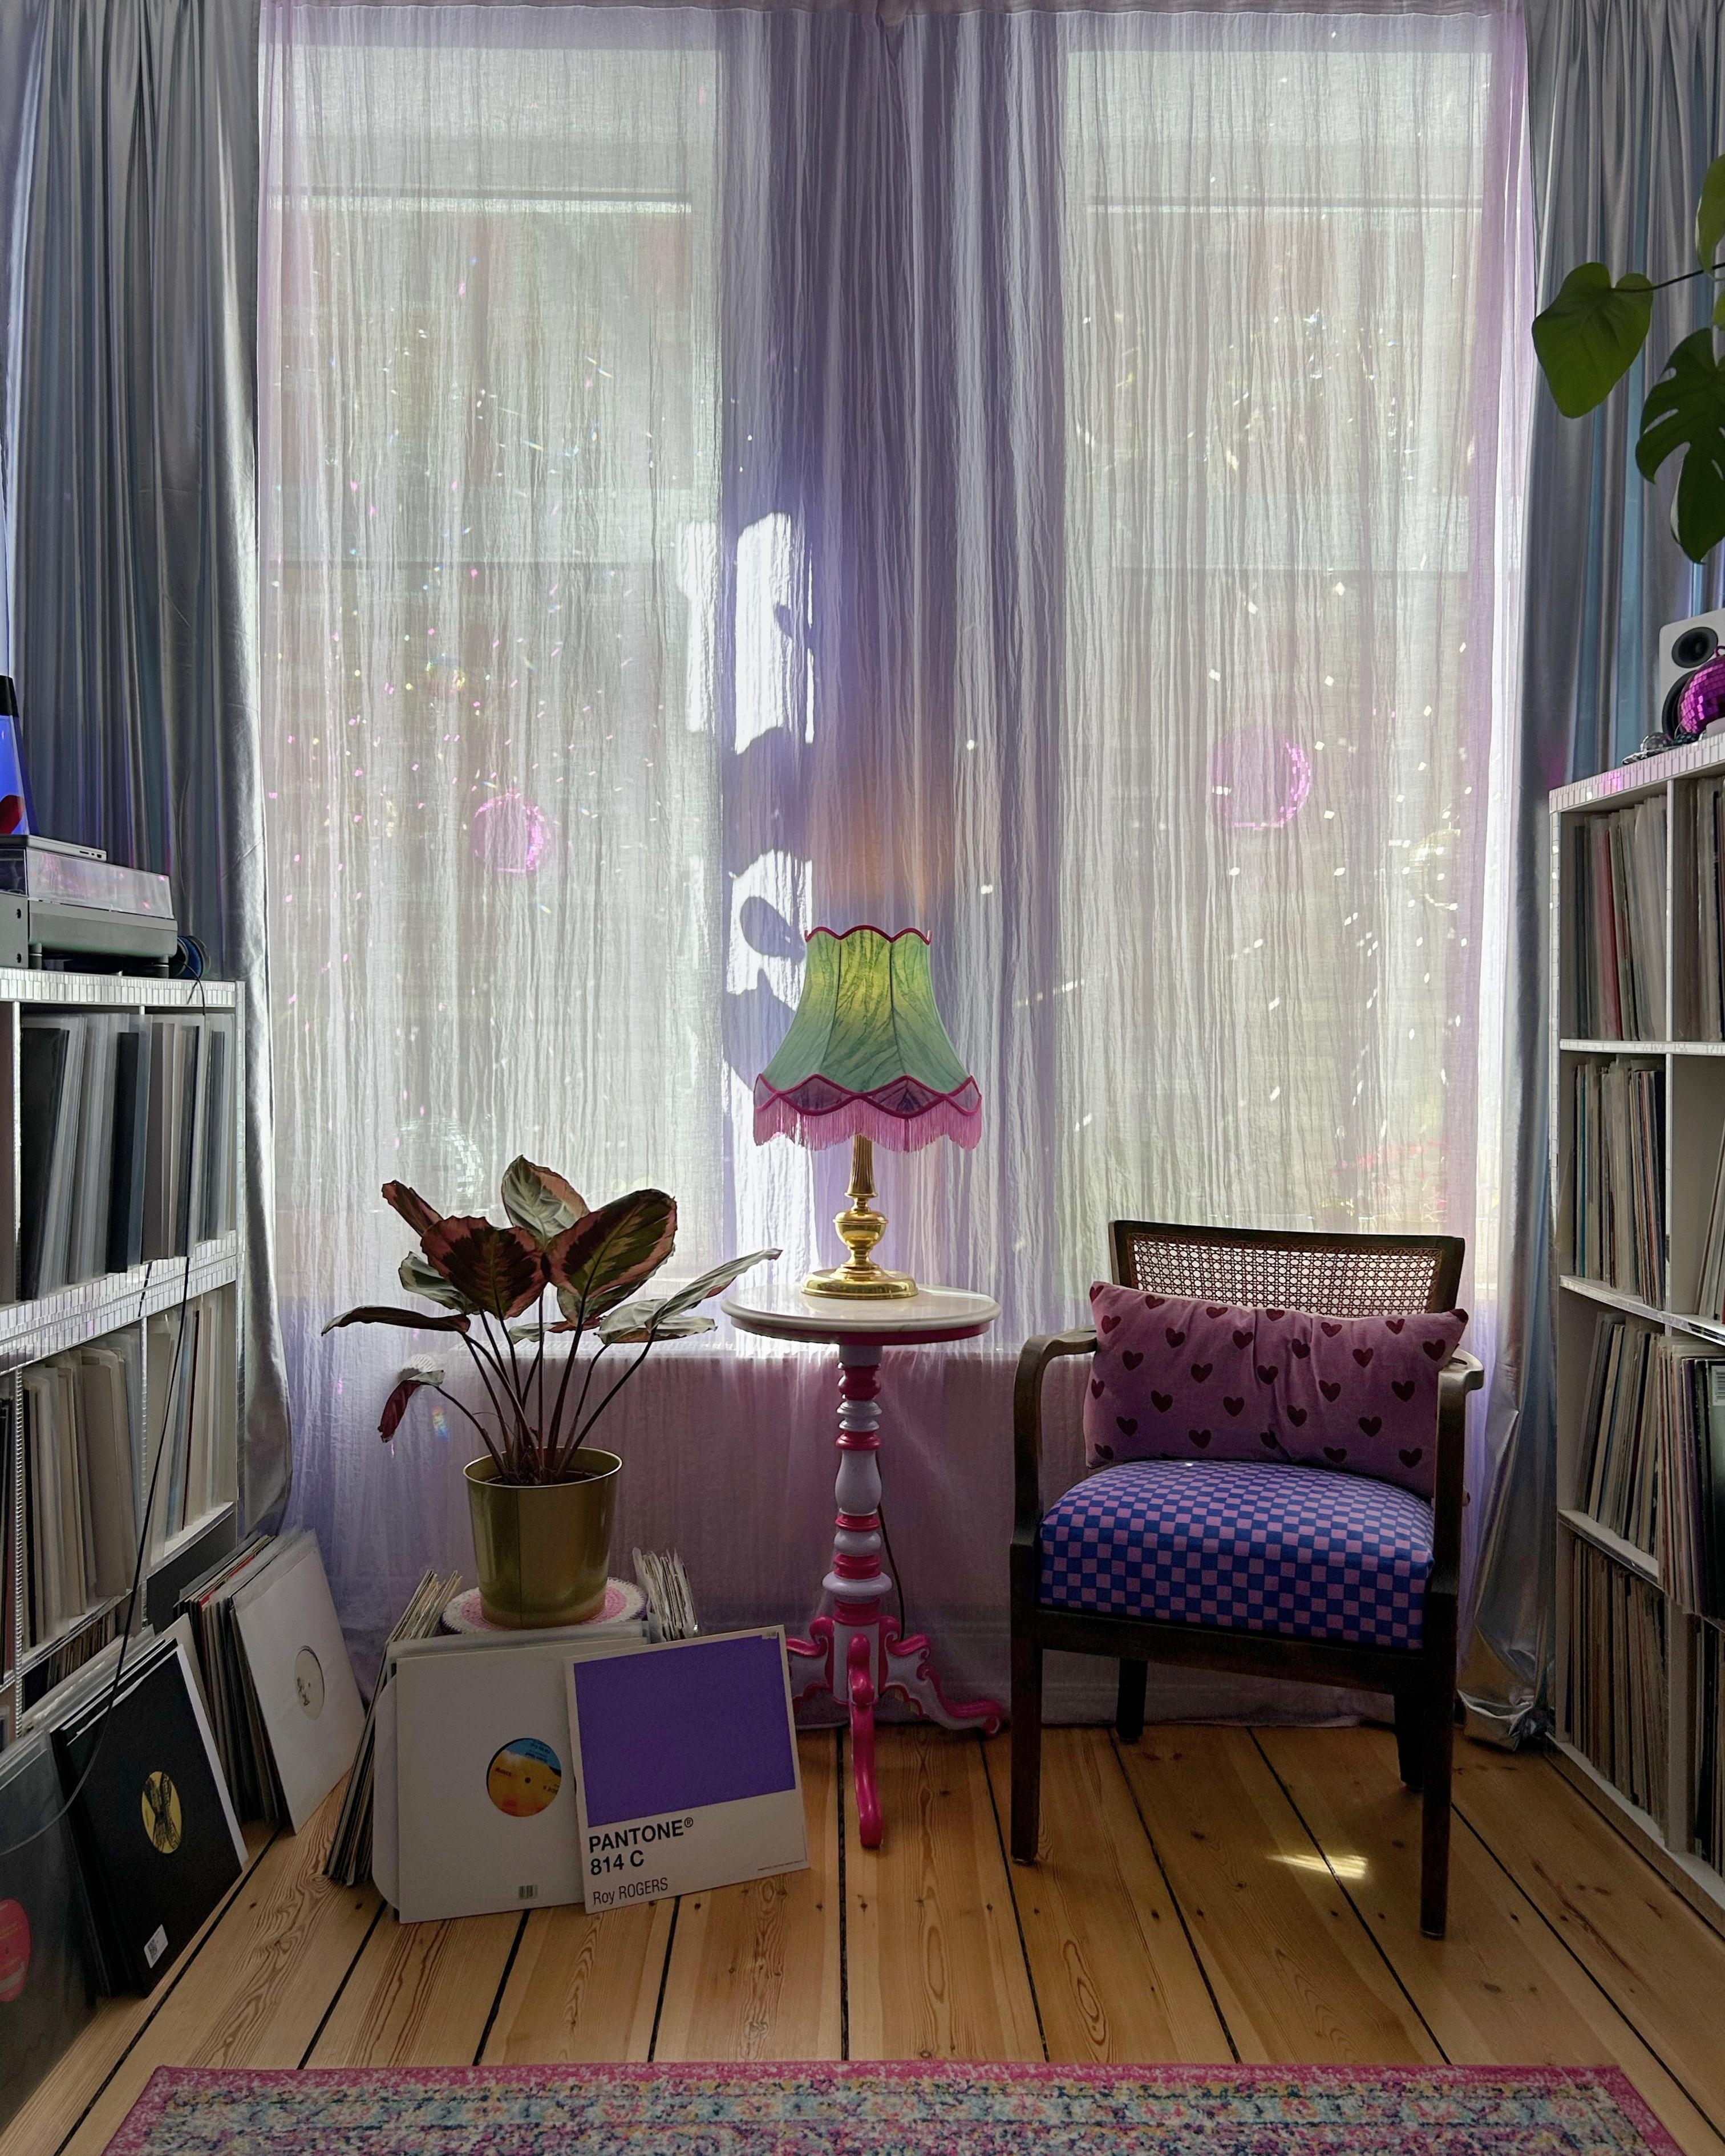 Alles upcycling #diy #purple #wohnnzimmer #disco #vintage #upcycle